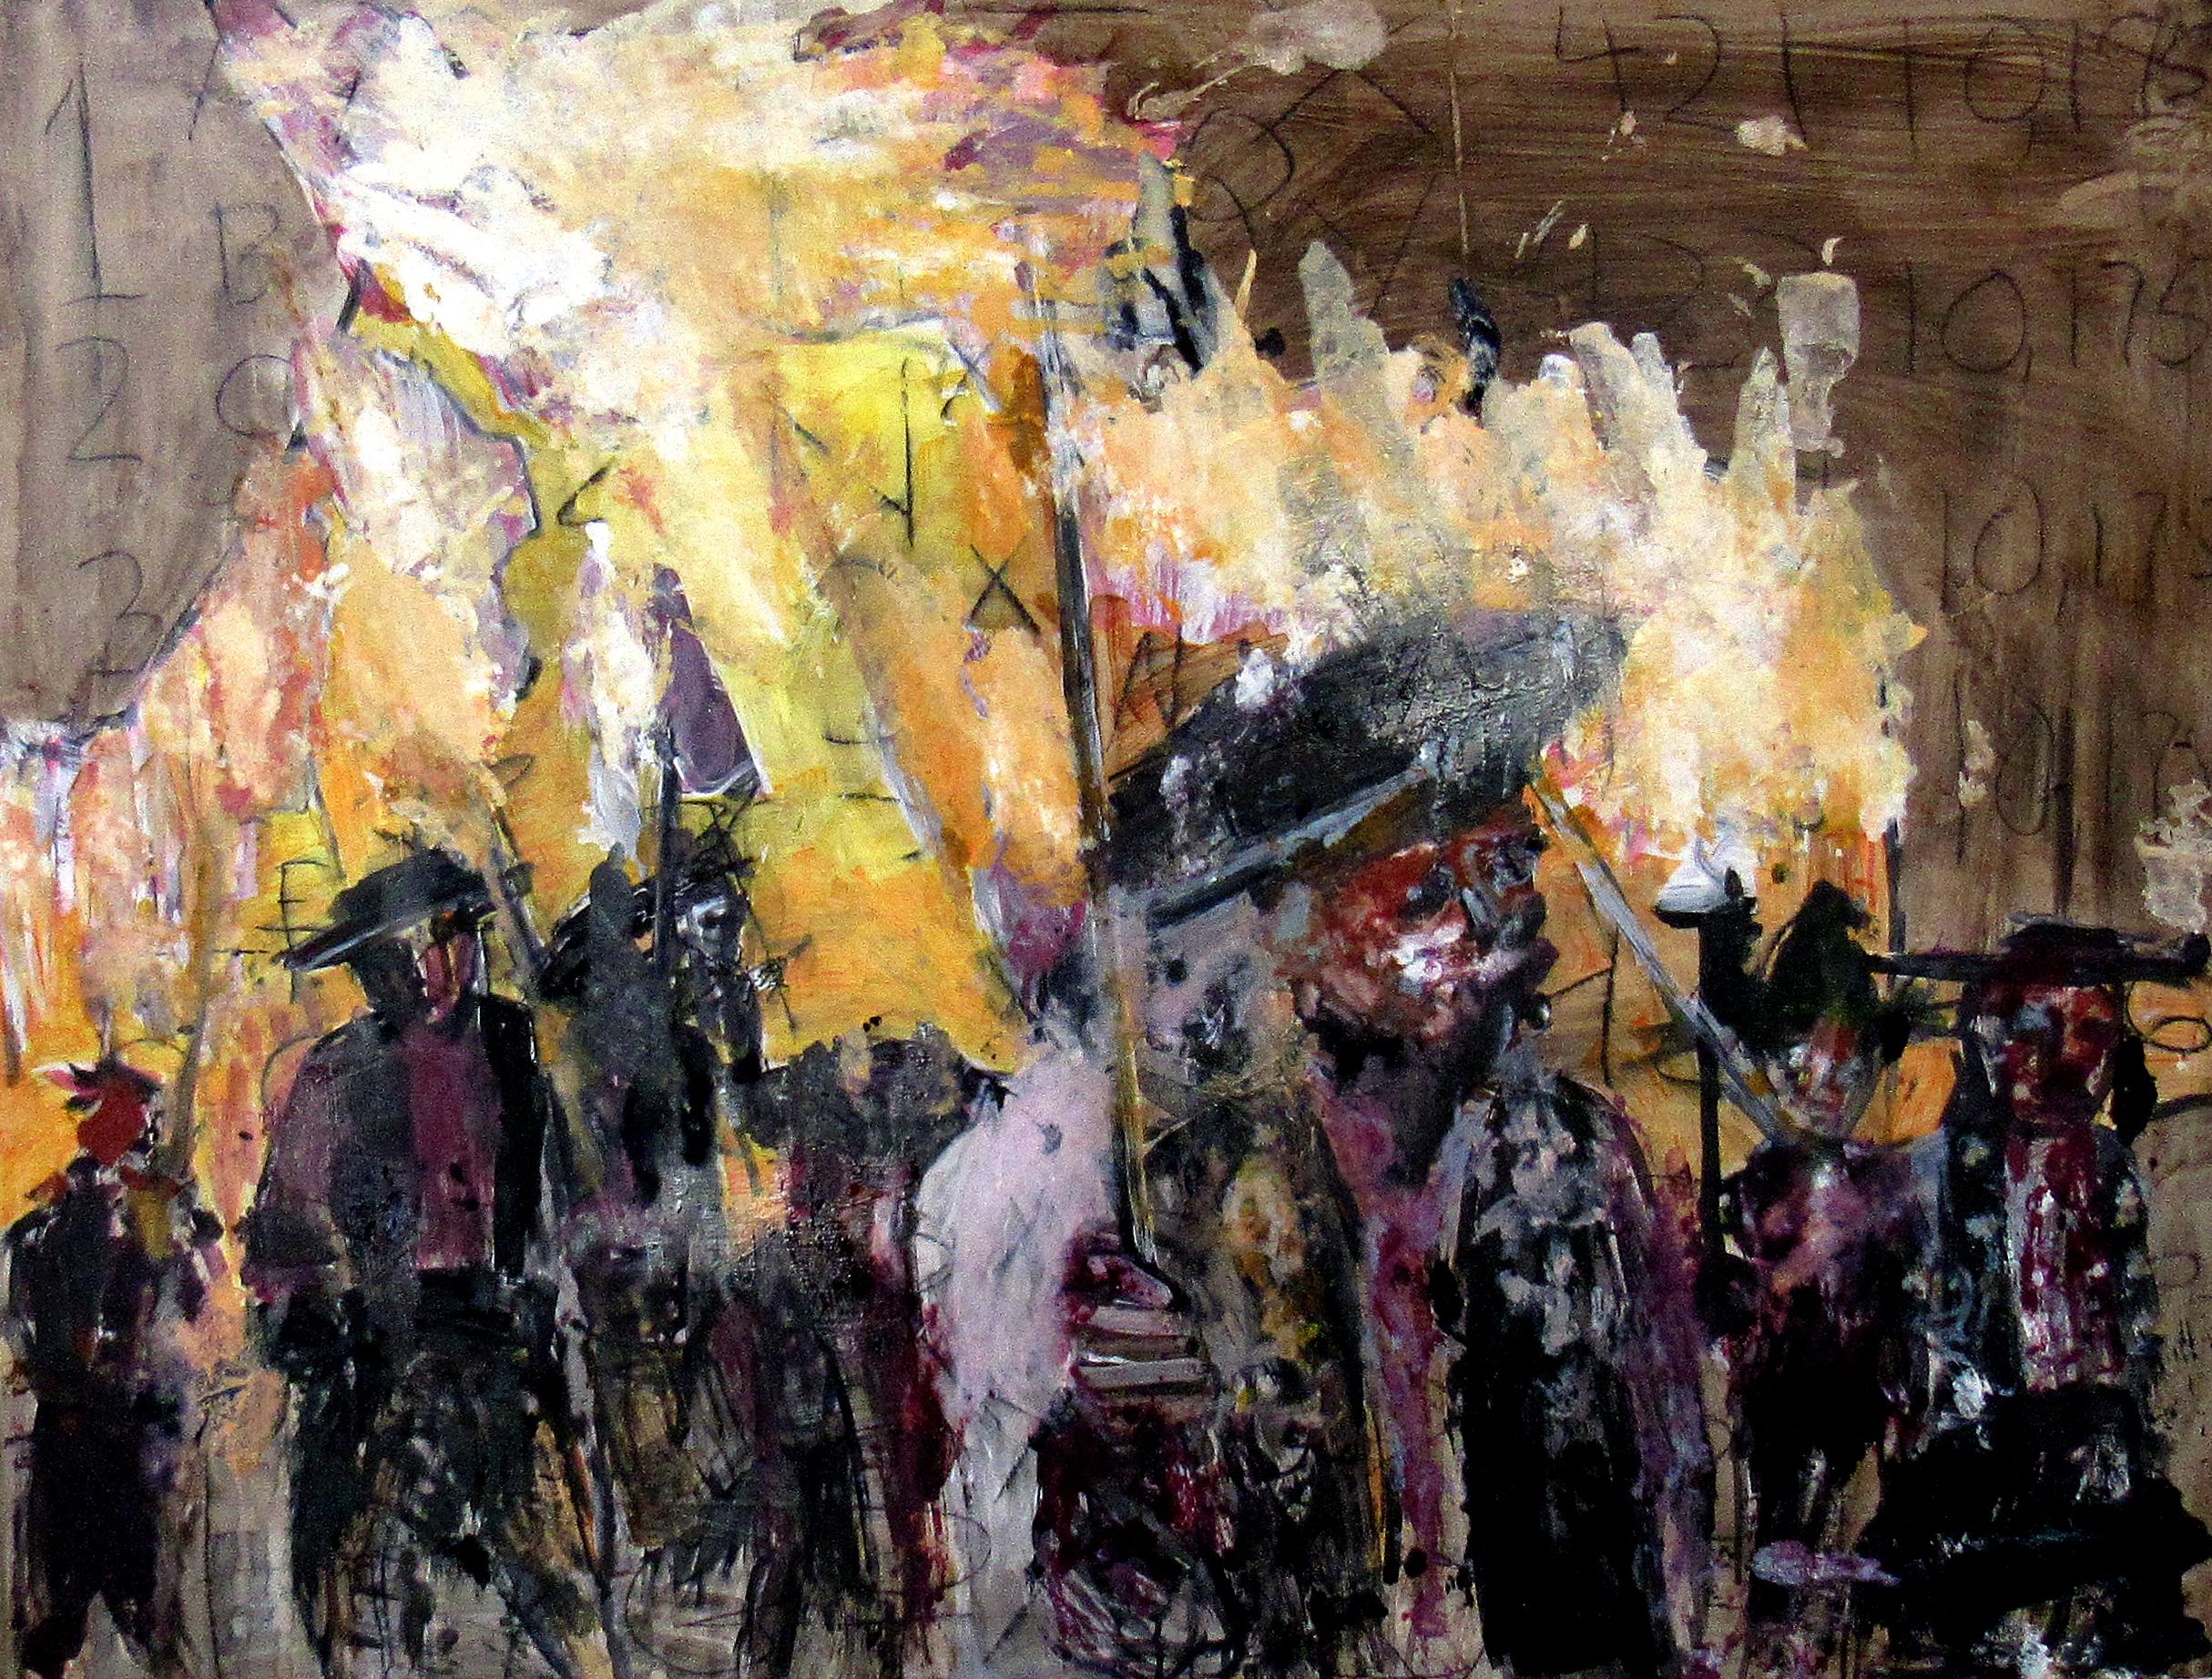 Lot, dramatic abstracted military theme, fire, multiple figures